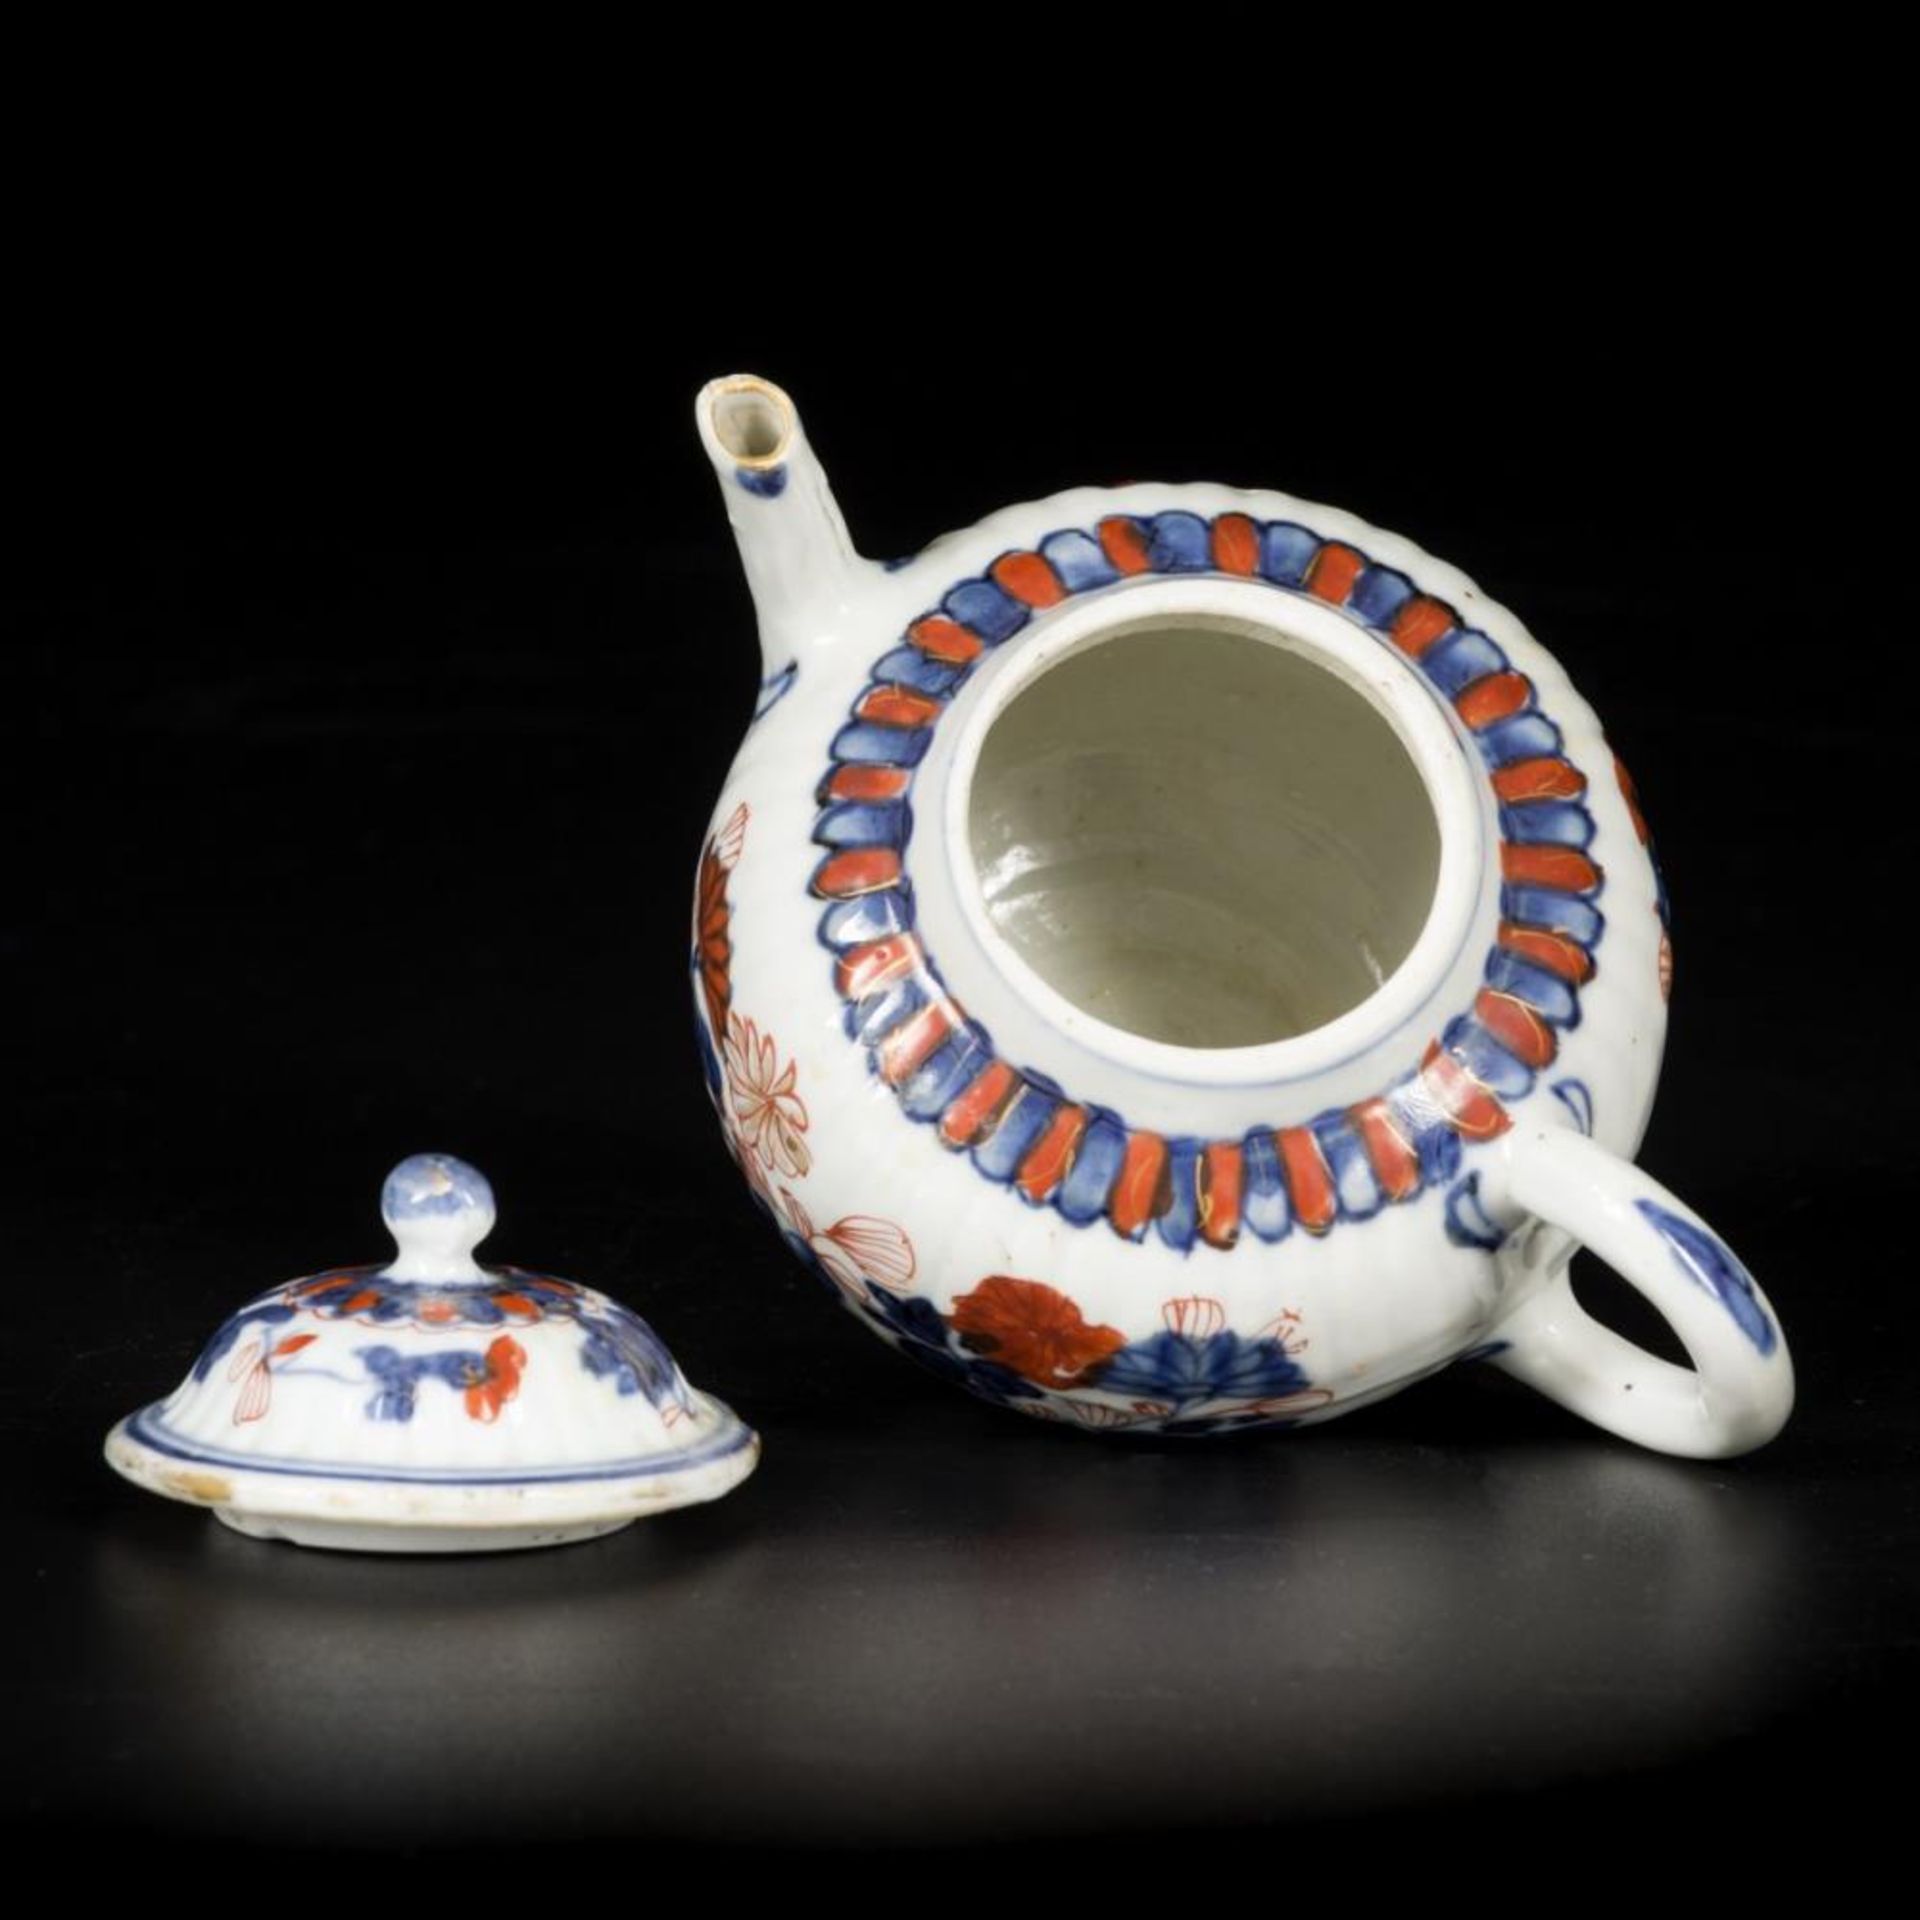 A porcelain Imari teapot with lid, China, 18th century. - Image 5 of 8